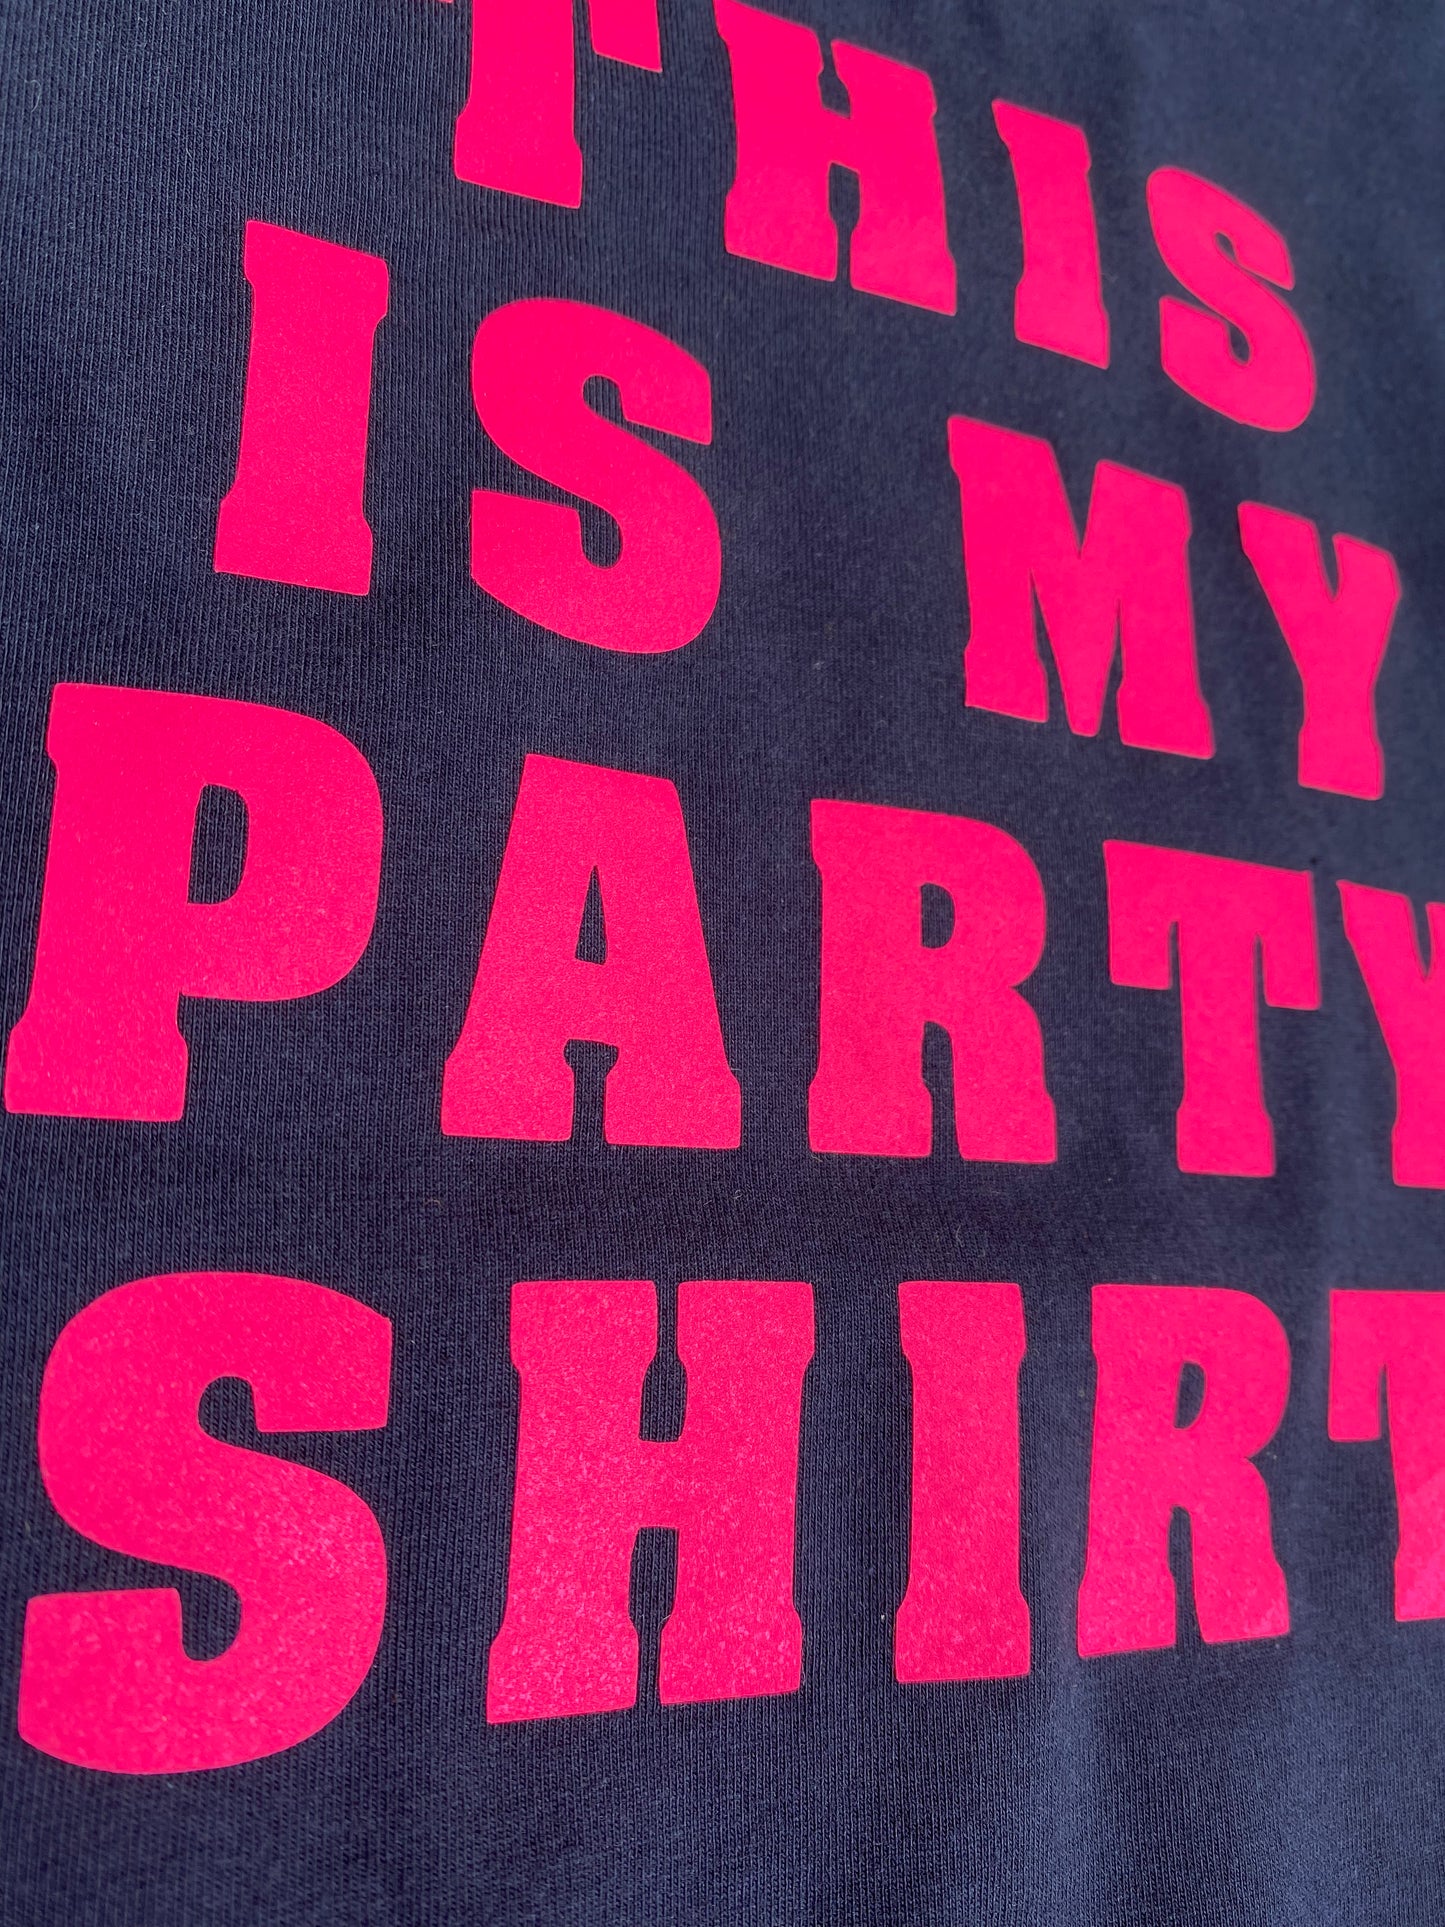 This Is My Party Shirt Dog Tee